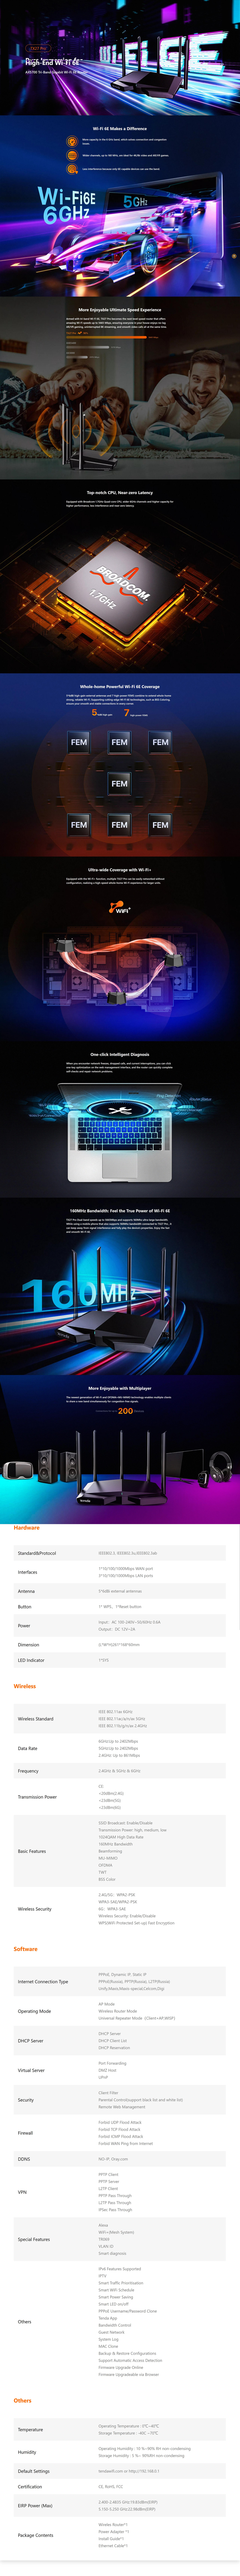 A large marketing image providing additional information about the product Tenda TX27 Pro AX5700 Tri-Band Gigabit Wi-Fi 6E Router - Additional alt info not provided